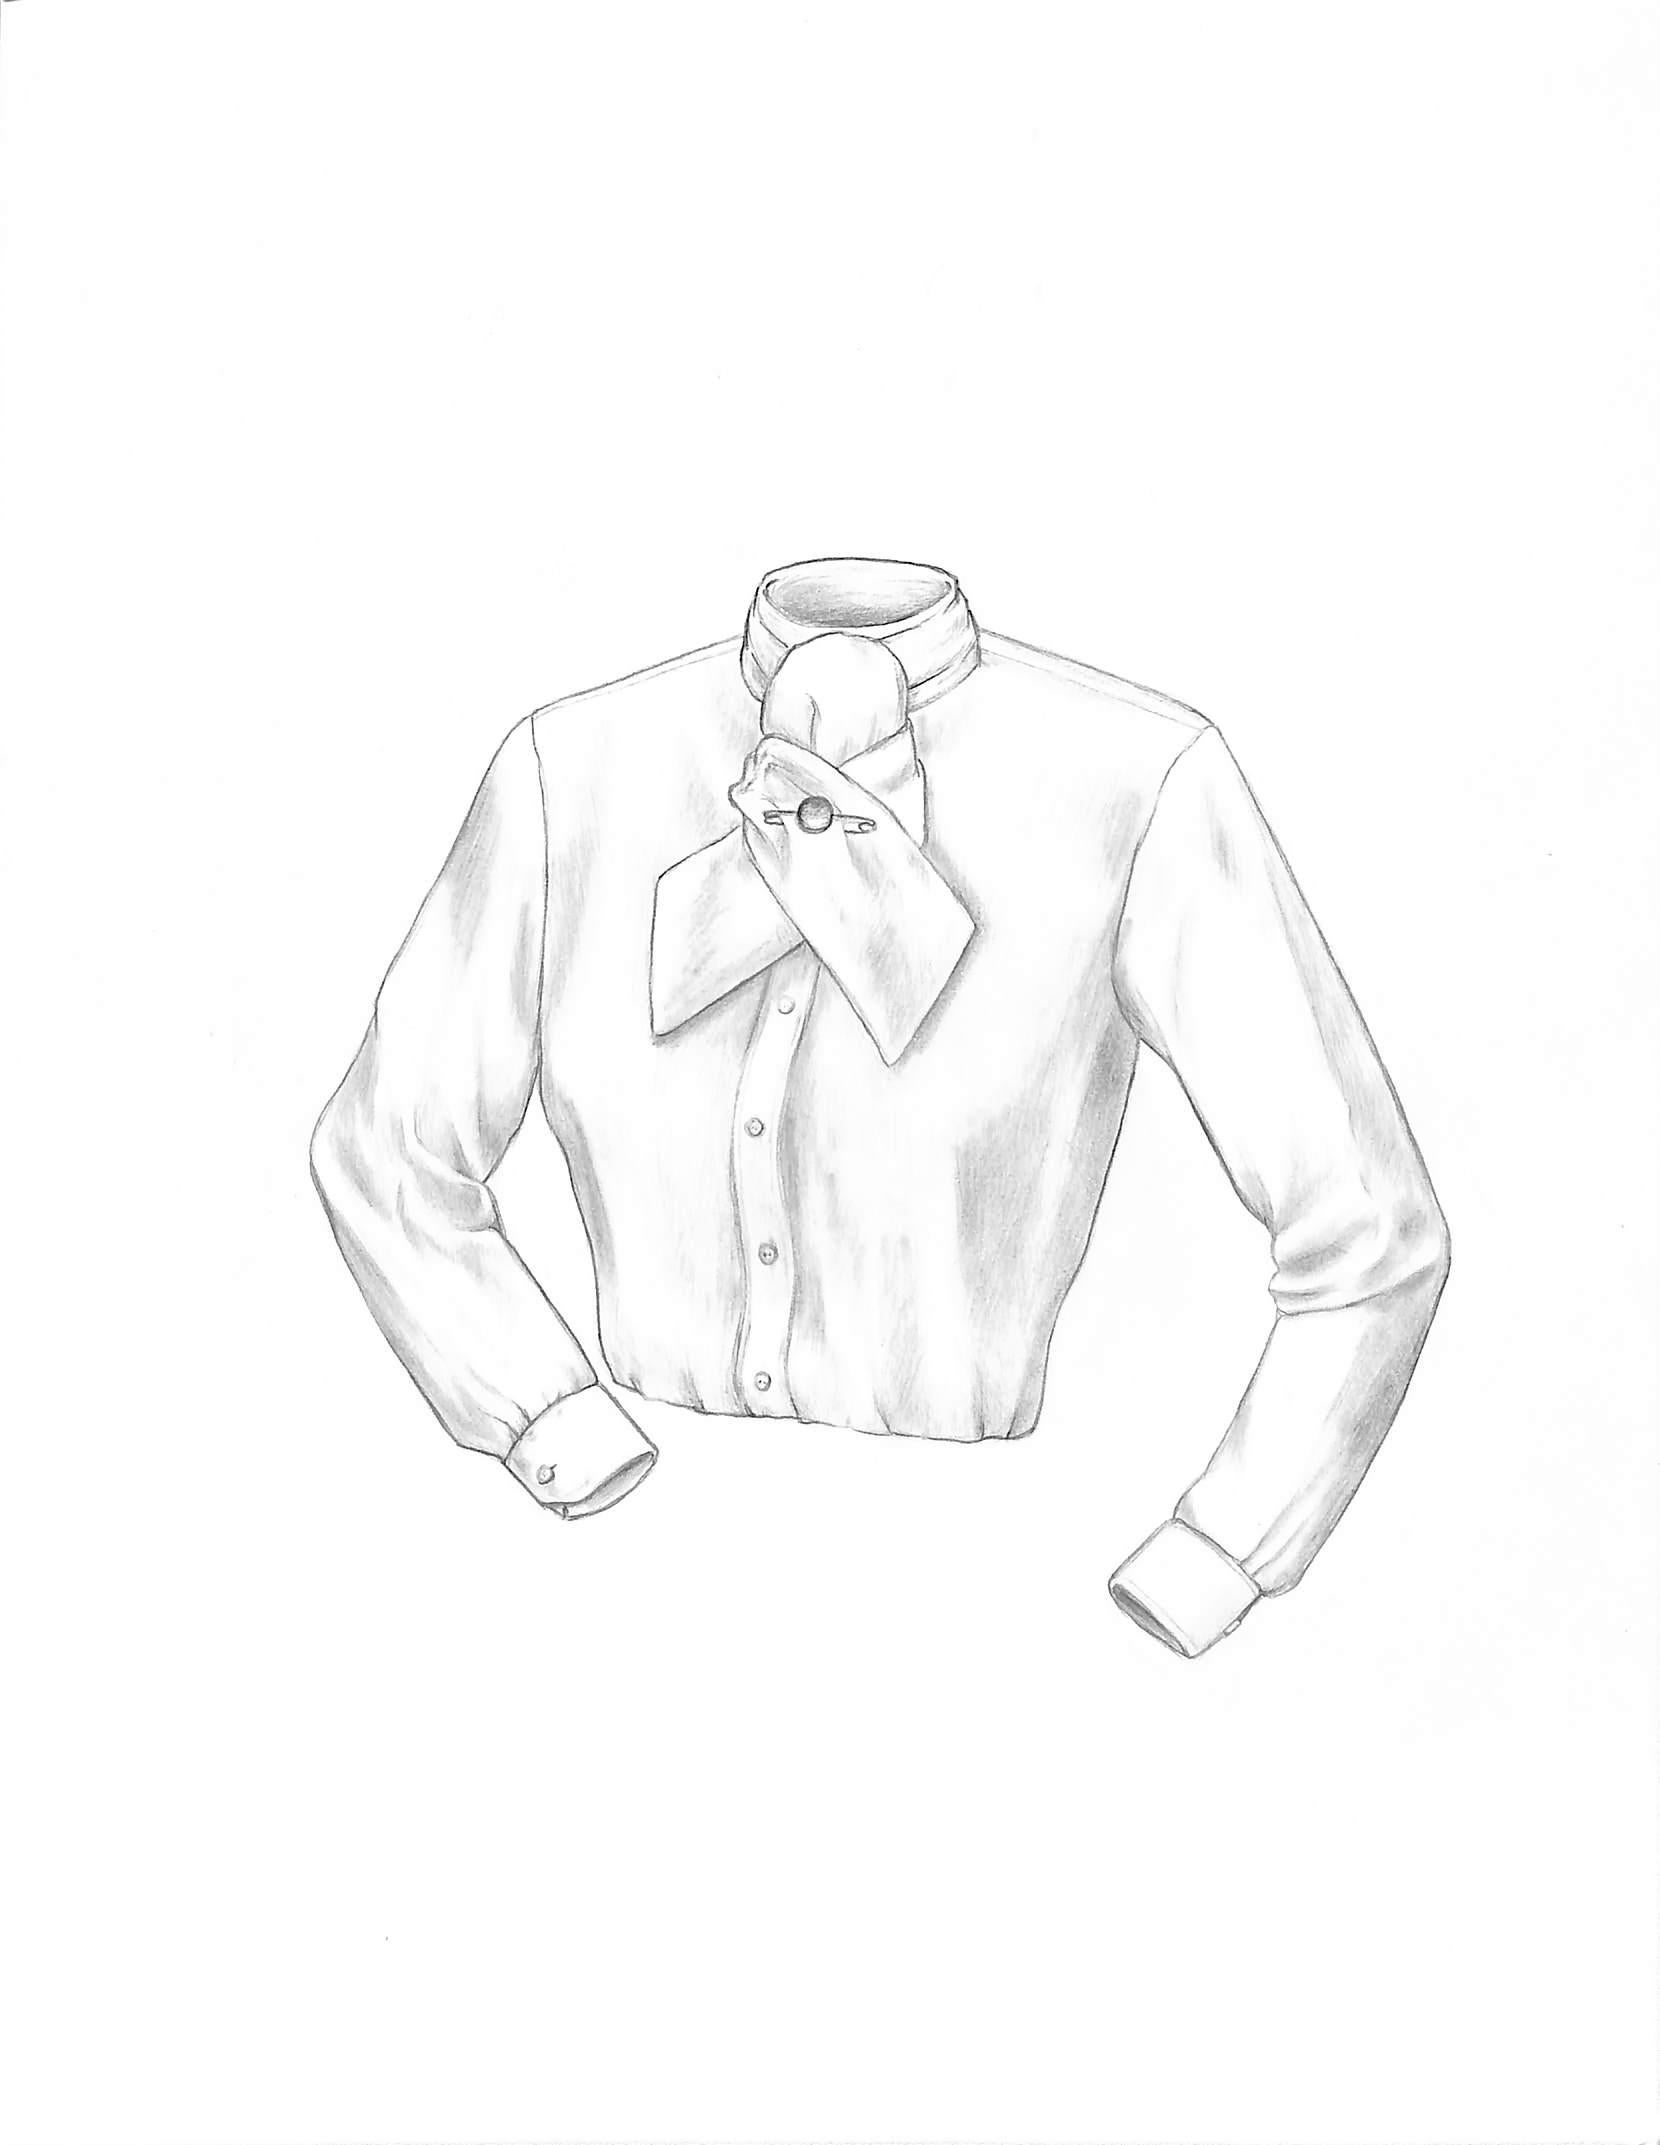 New Cotton Pique Hunt Shirt w/ Tie Graphite Drawing - Art by Unknown